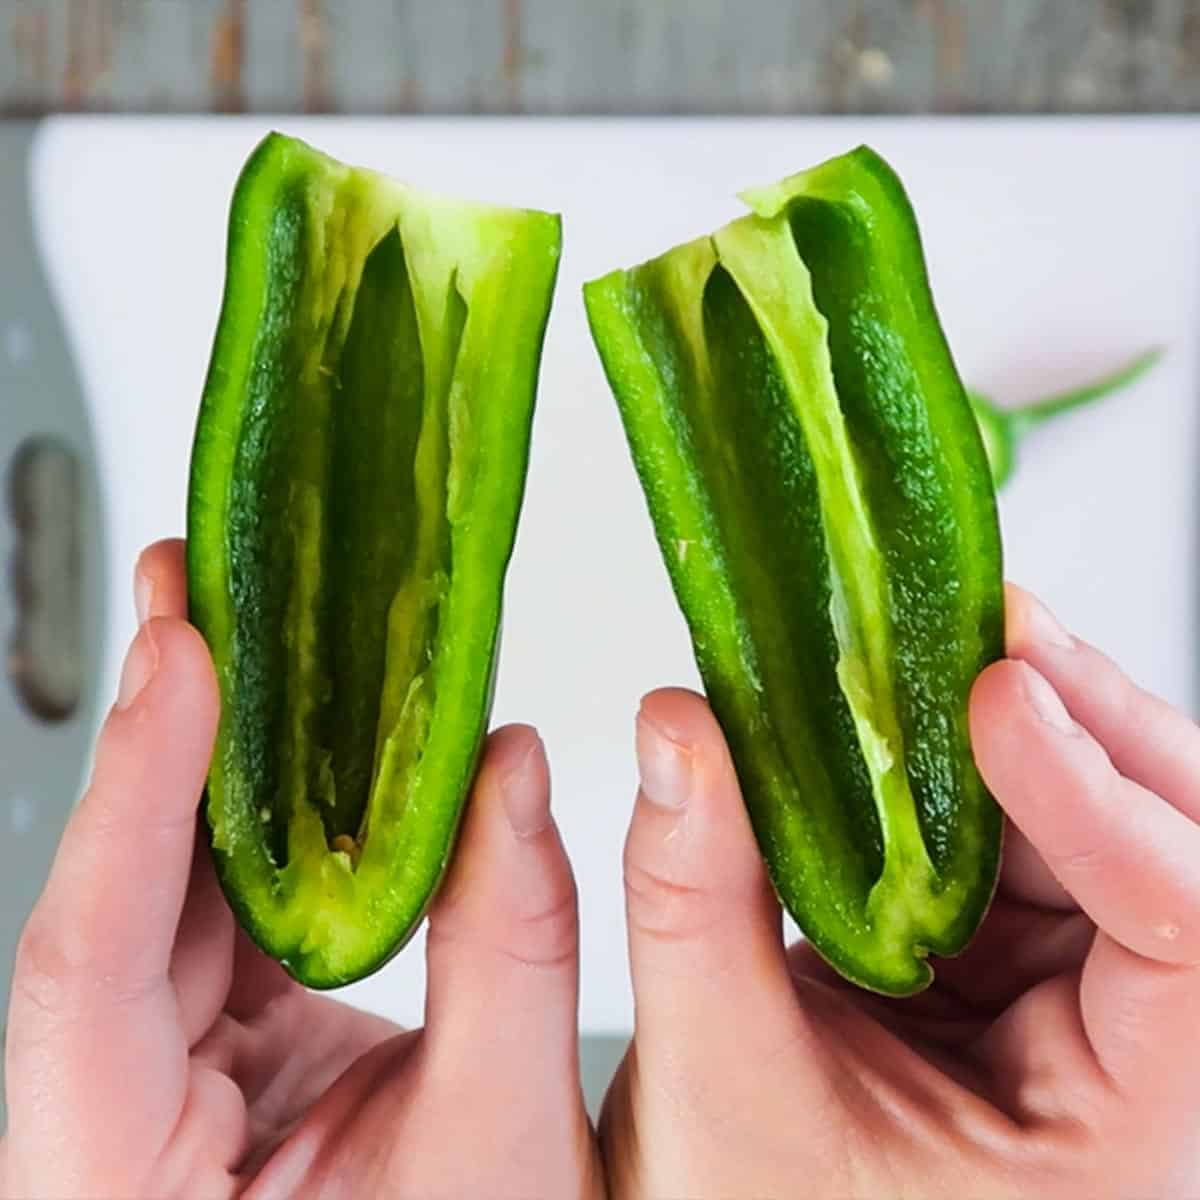 Holding two halves of a jalapeno pepper with the seeds removed for how to cut a jalapeno